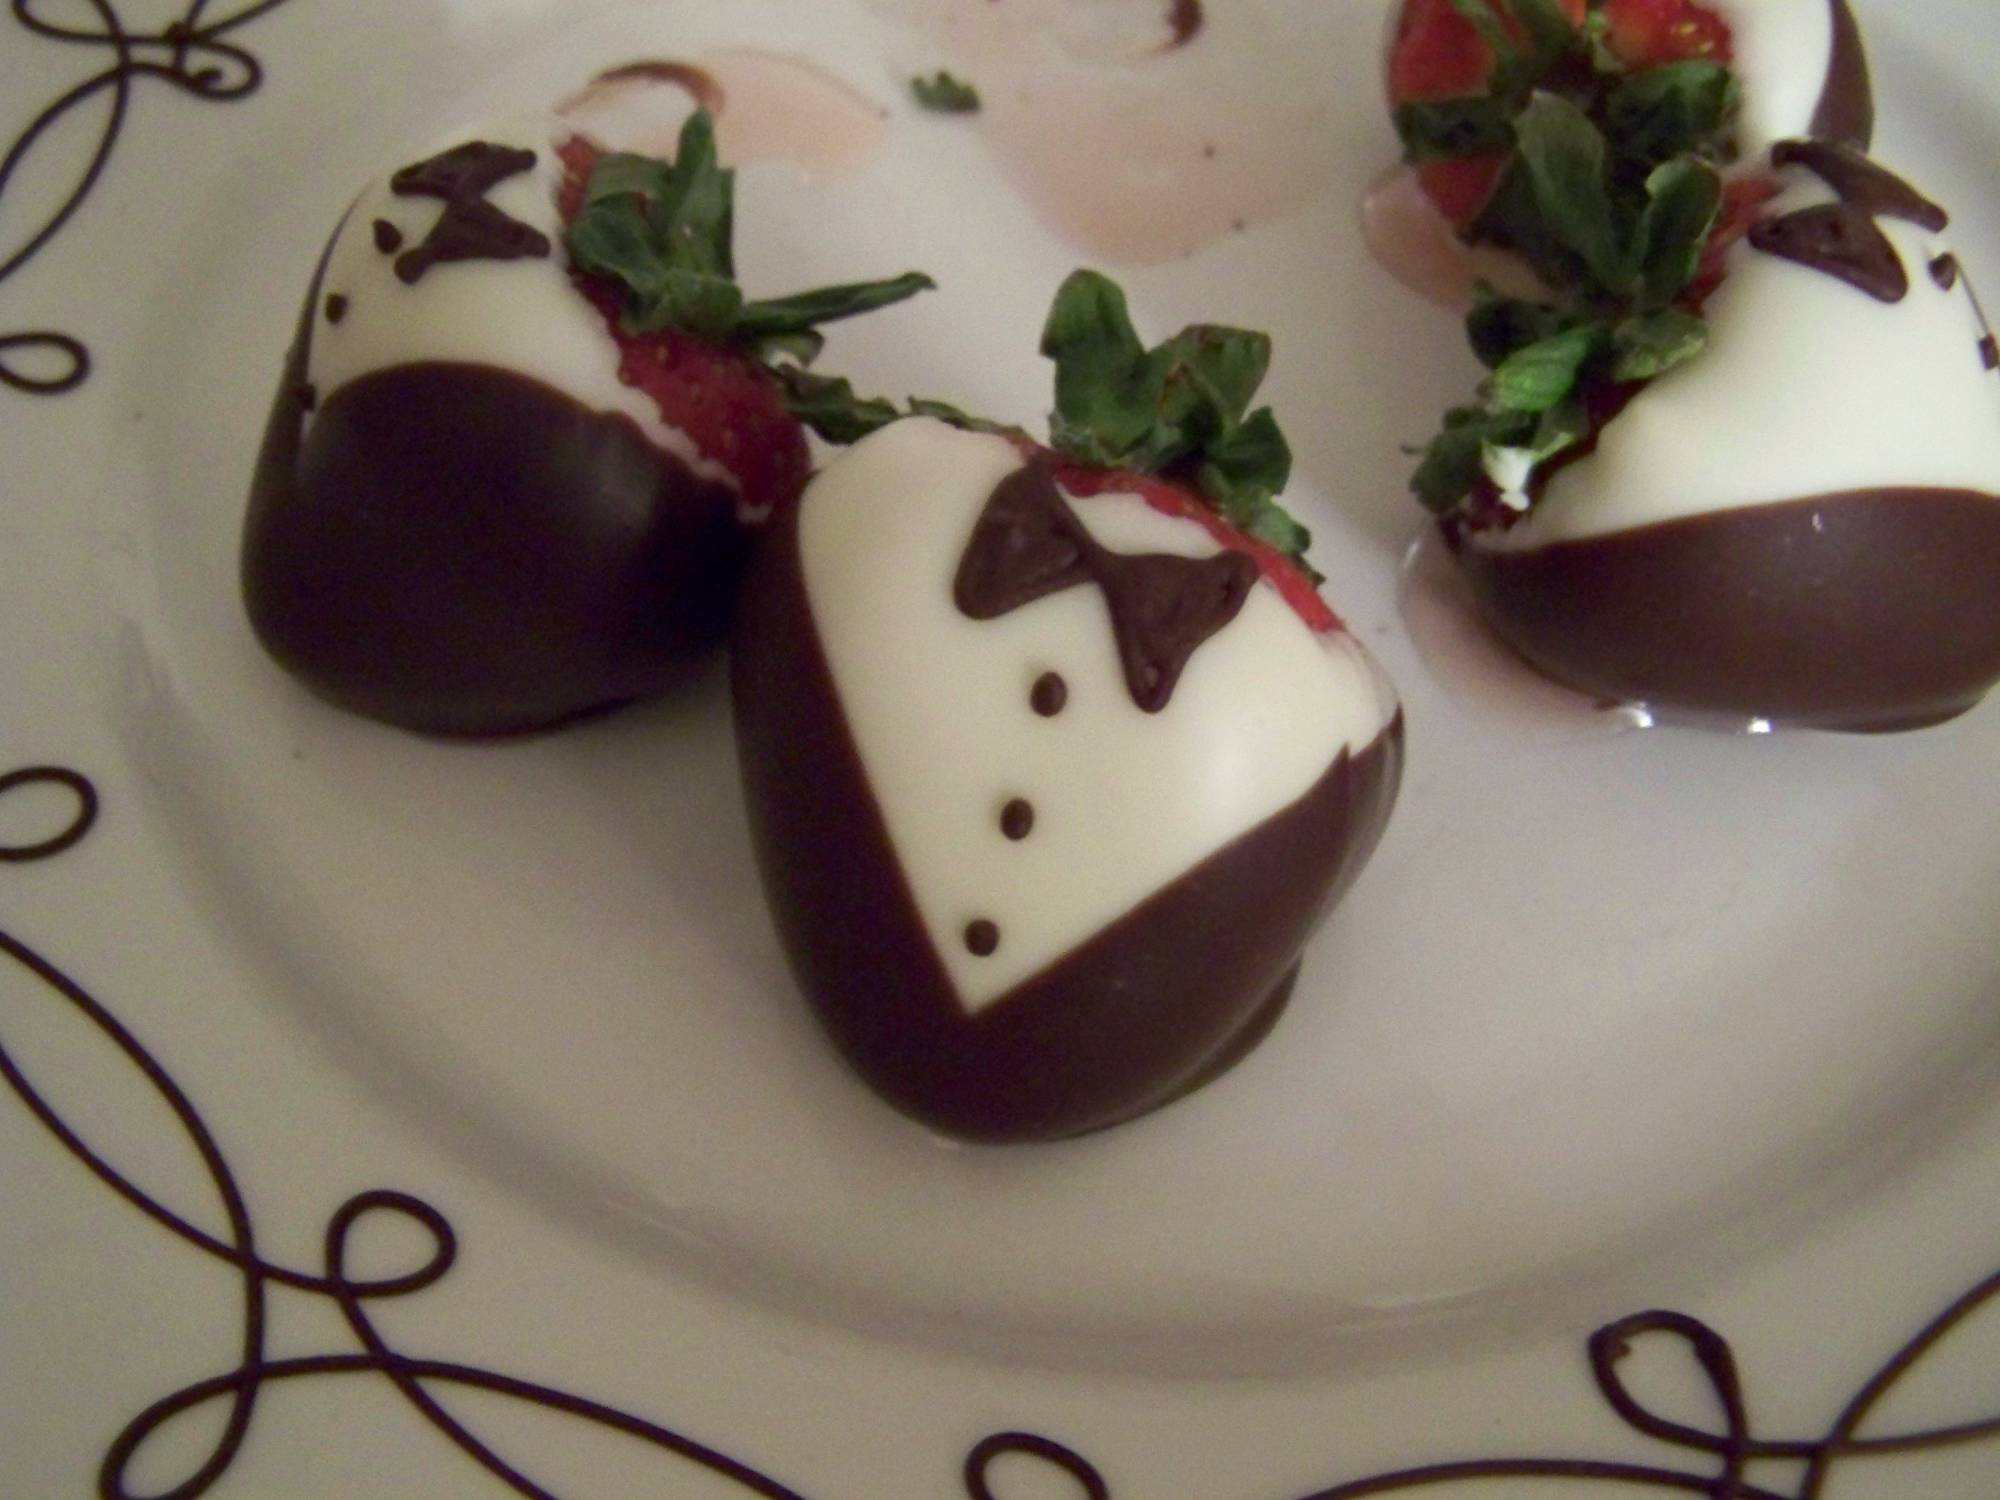 Chocolate Covered Strawberries from Boardwalk Inn and Villas